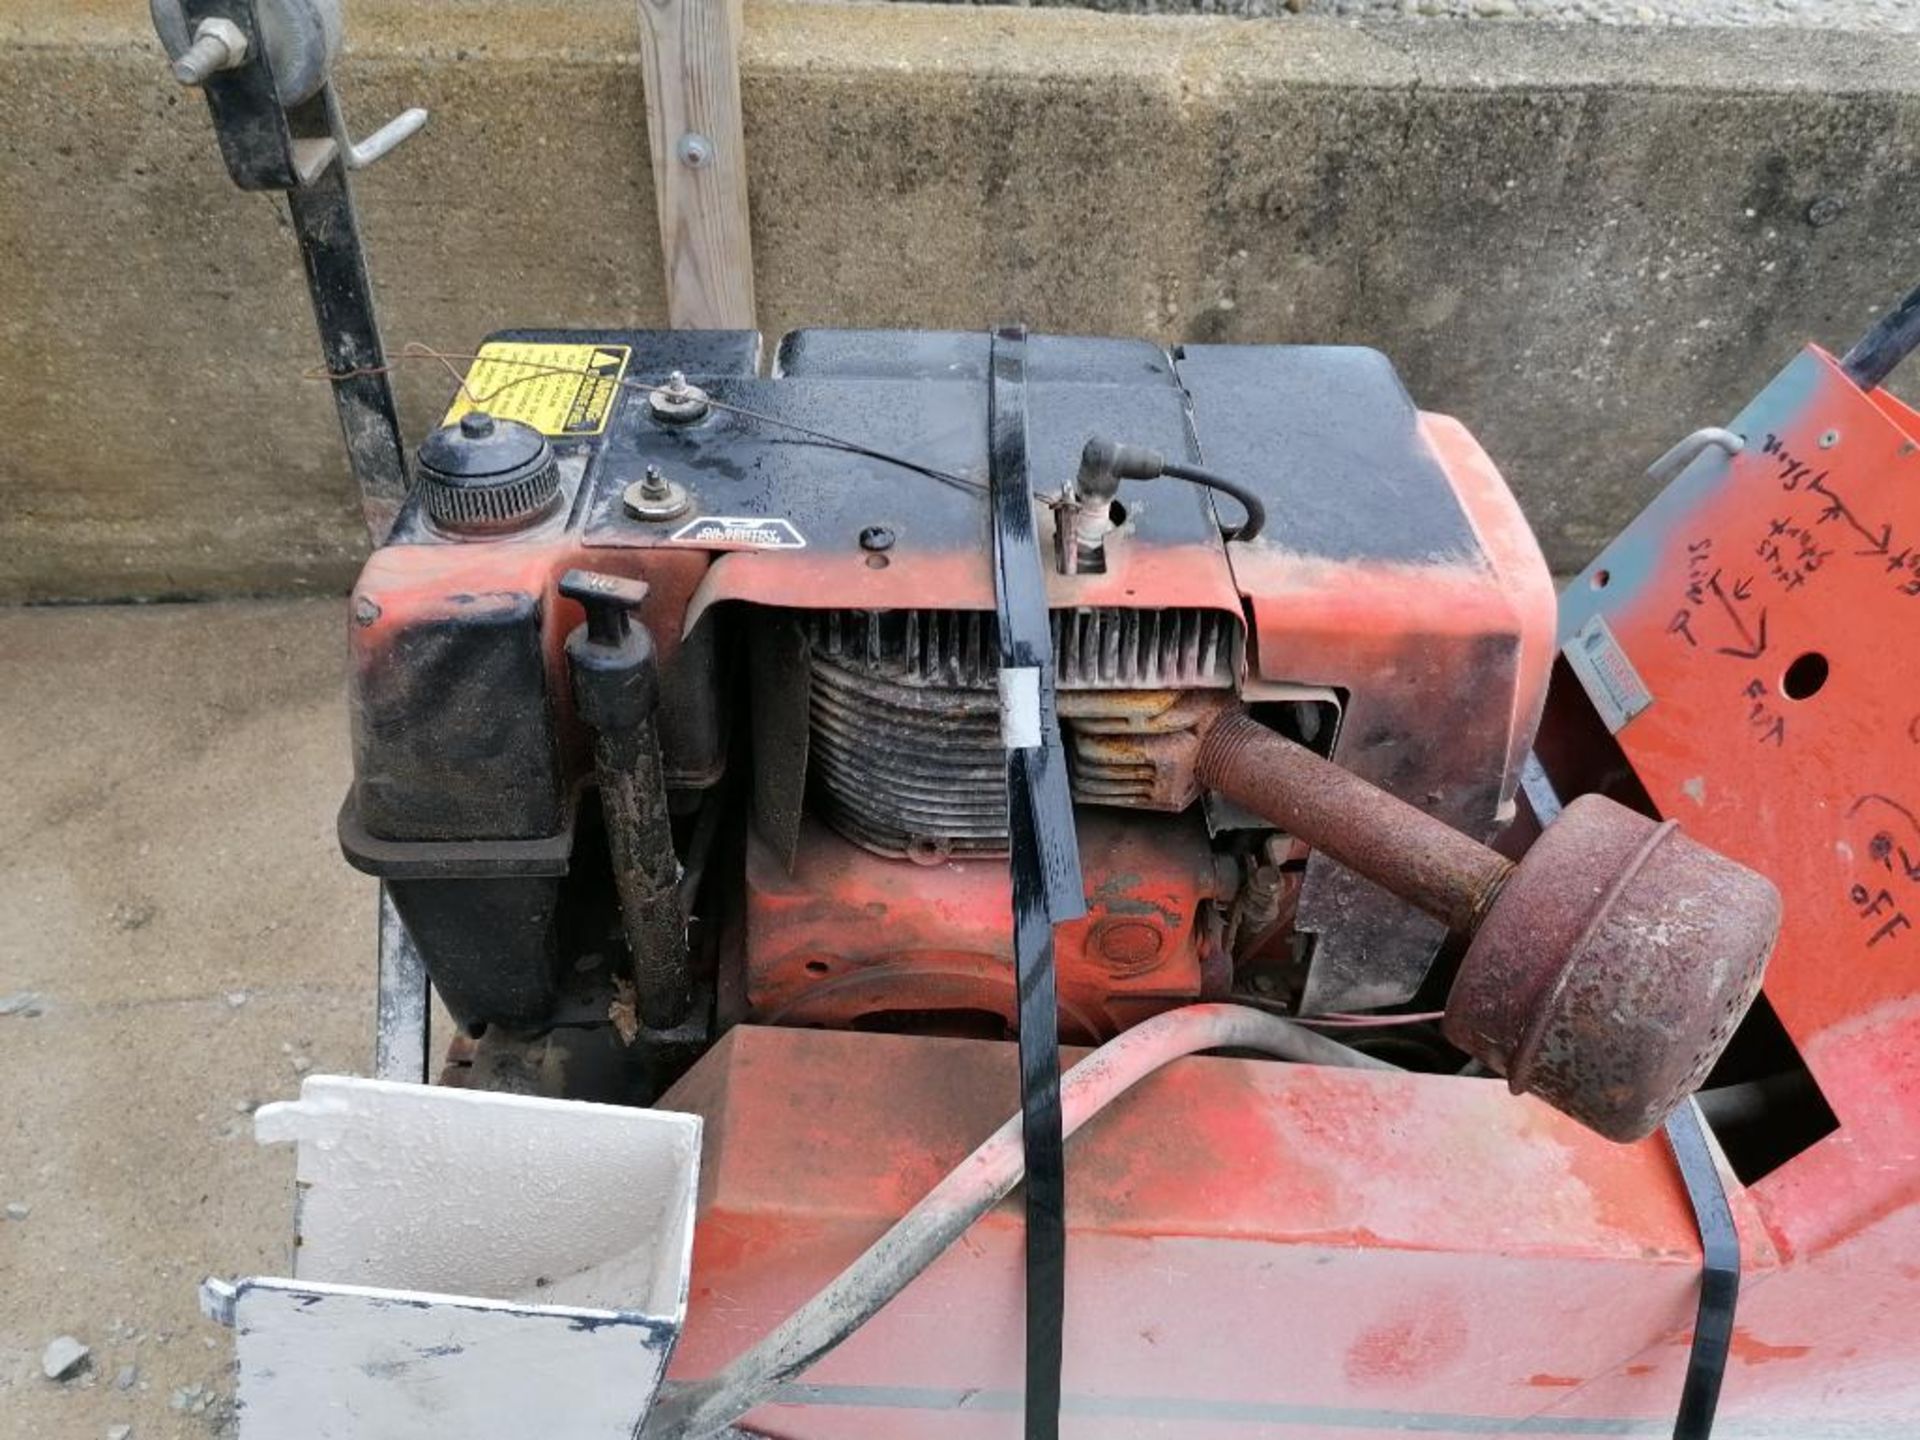 (1) CORE CUT CC1414K Walk Behind Concrete Saw, Serial #1255237 with Kohler Magnum 14 Engine. Located - Image 14 of 15